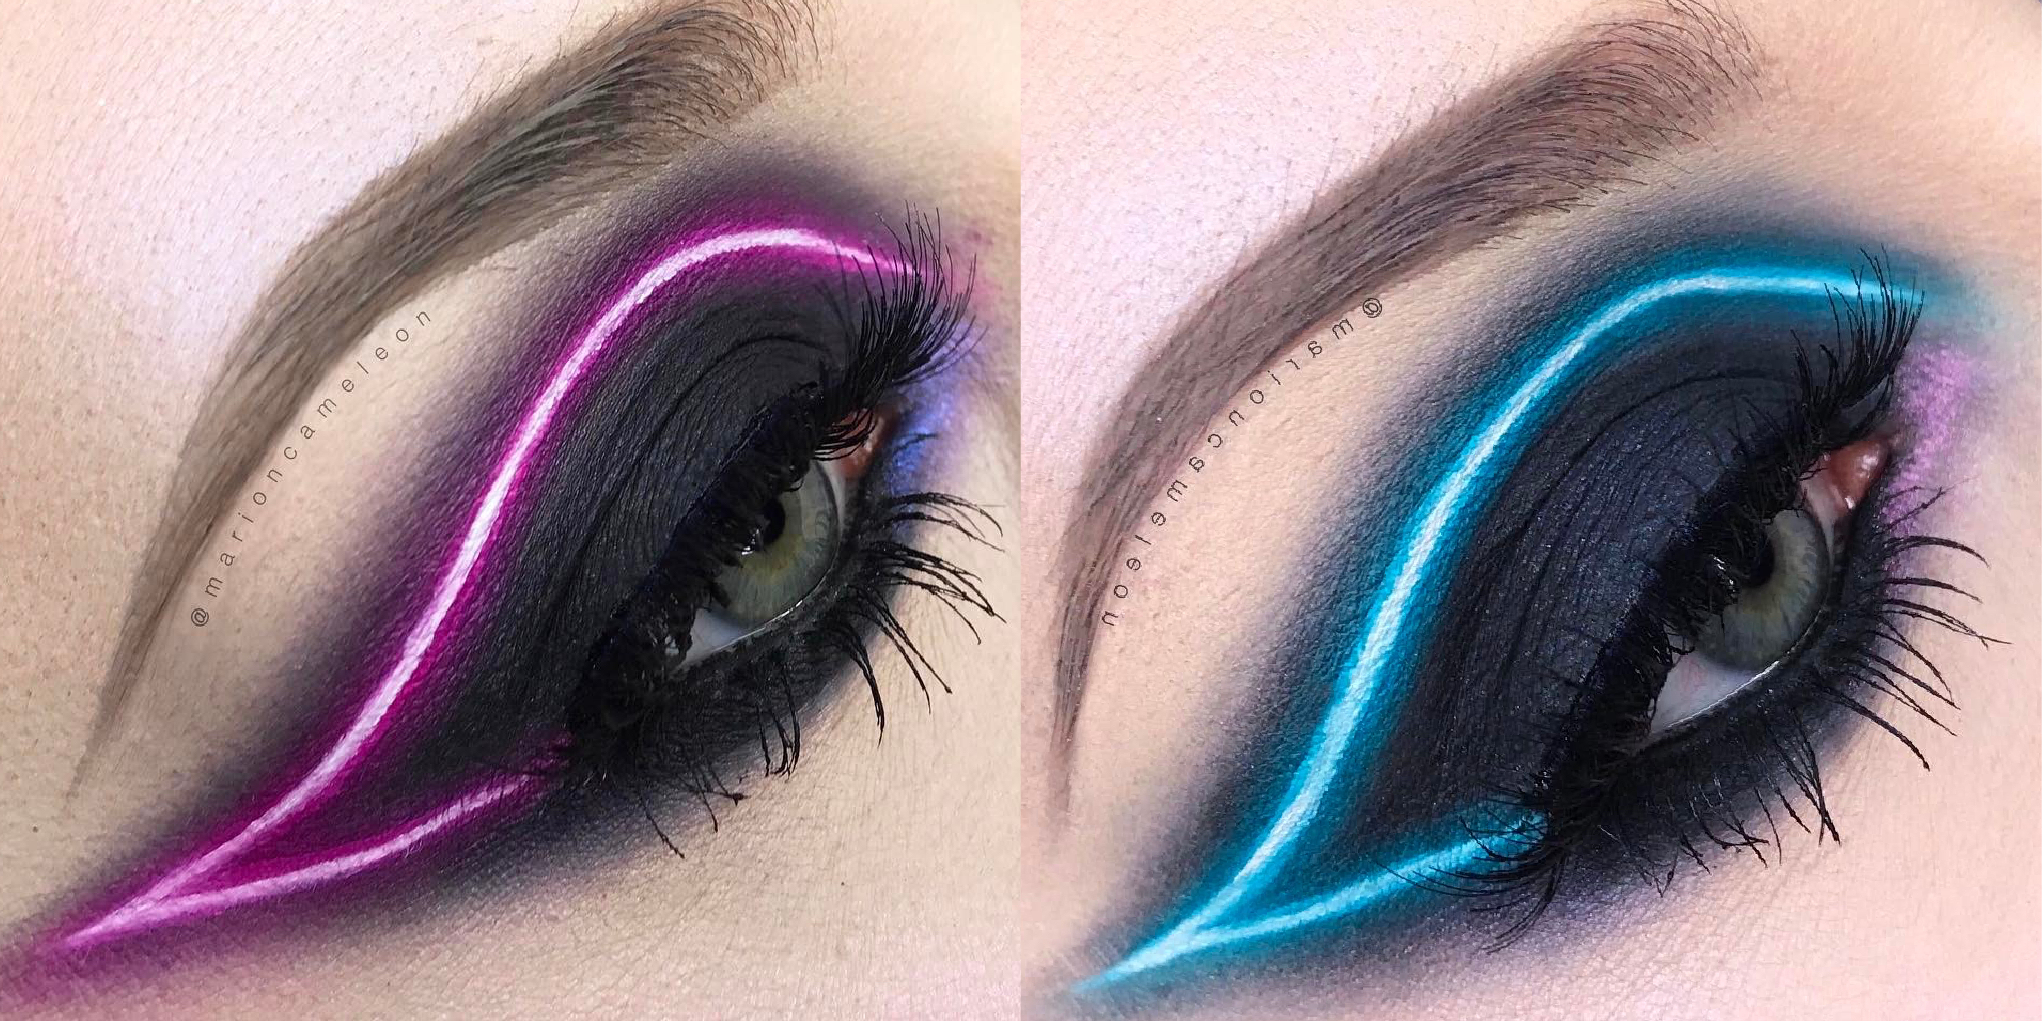 Neon Eye Makeup You Need To Try The New Neon Light Makeup Trend